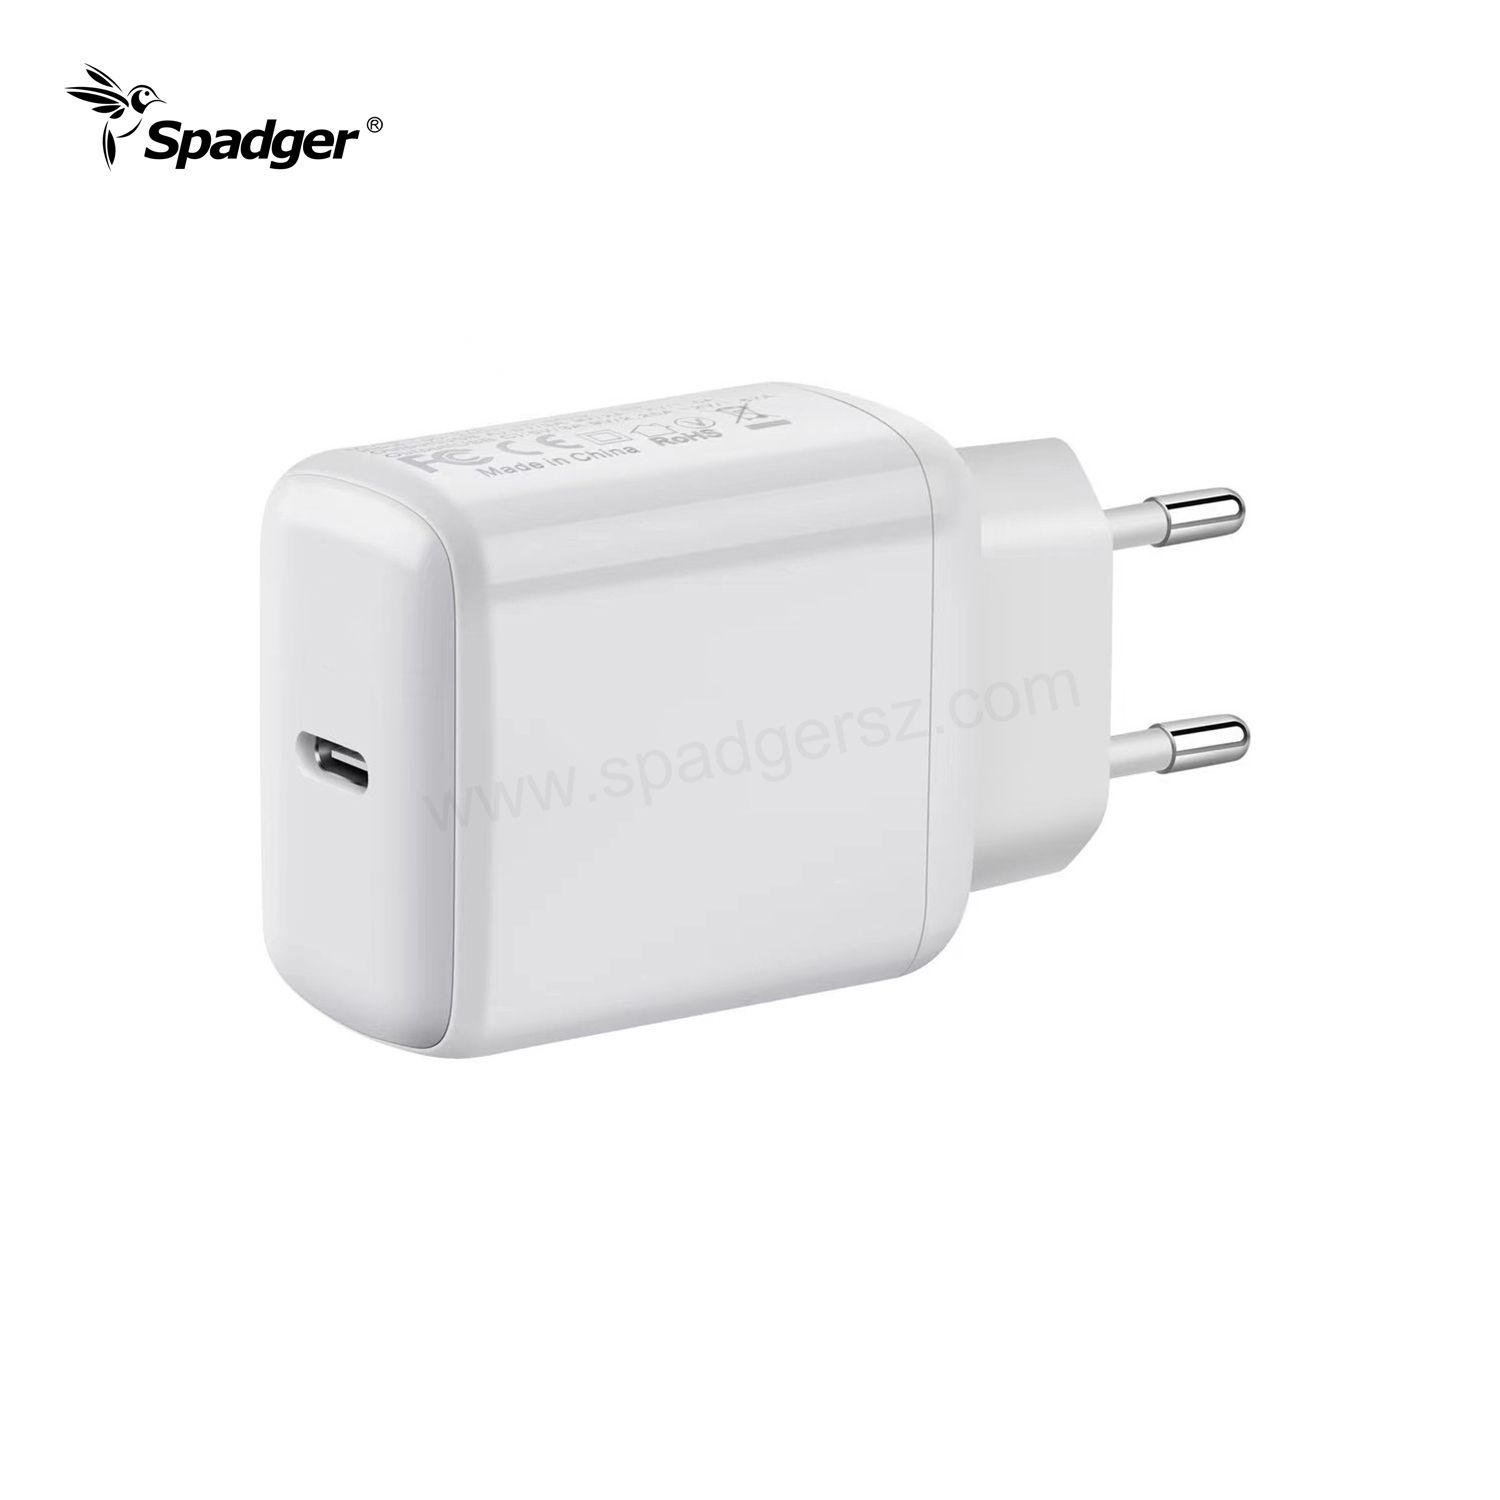 China New Product PD30W Type-C Wall Charger - Original Factory TYPE-C Fast Charger PD30W Travel charger USB C USB C Mobile Phone Charger UK US AU EU Plug – Spadger